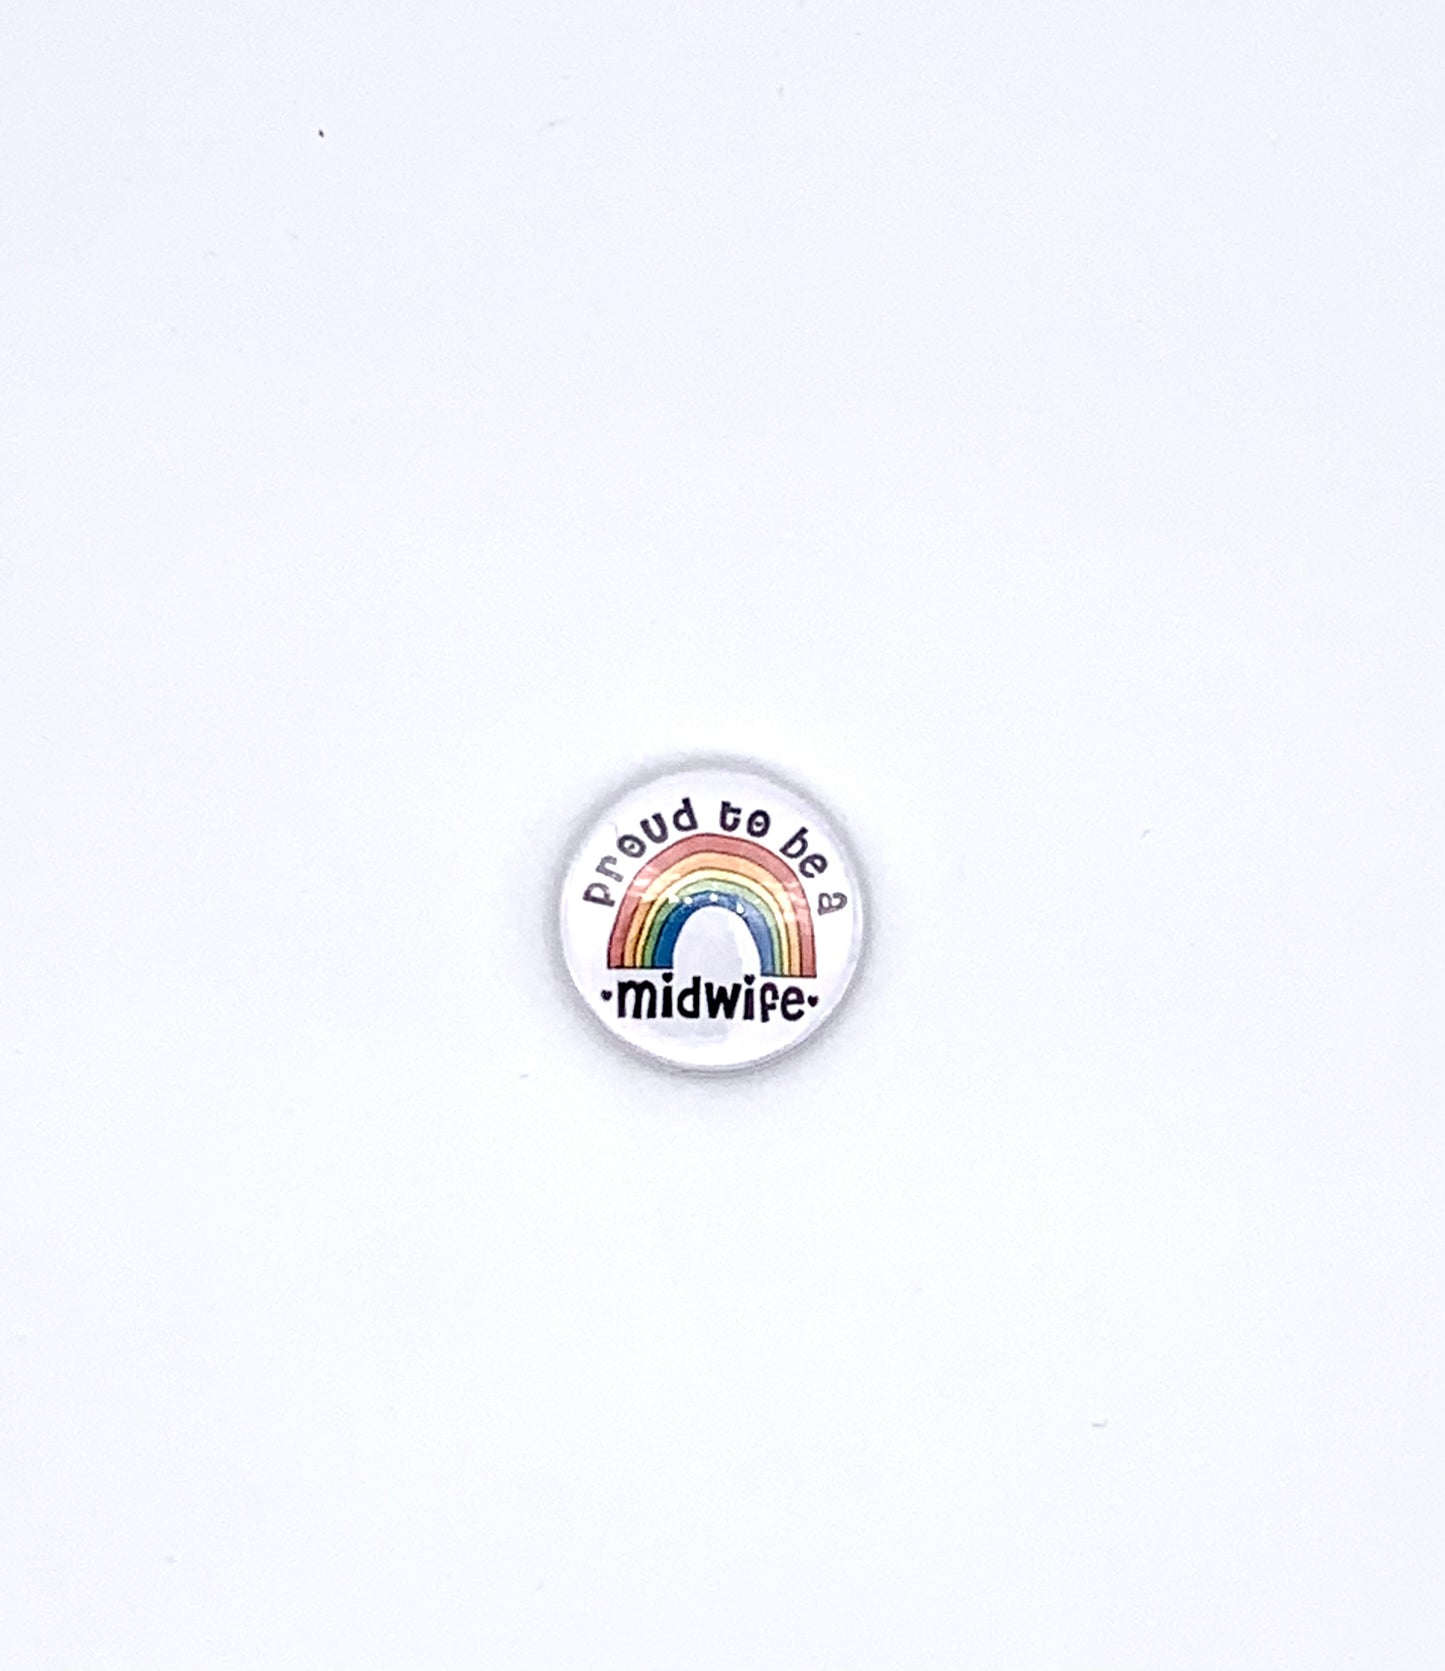 Proud to be a midwife- Pin Badge